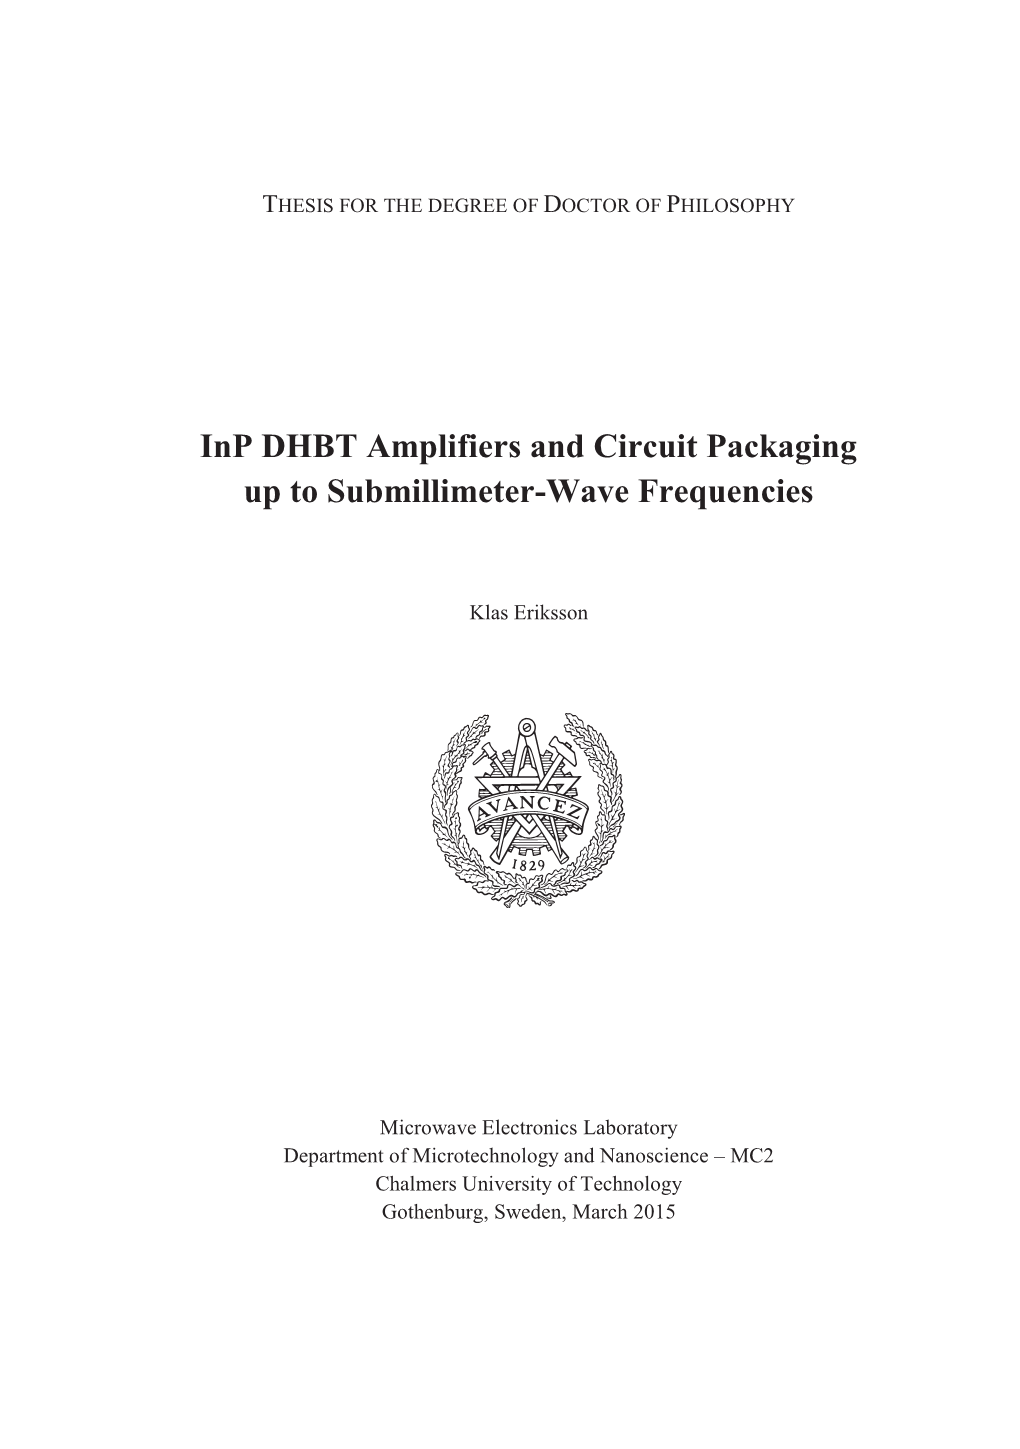 Inp DHBT Amplifiers and Circuit Packaging up to Submillimeter-Wave Frequencies